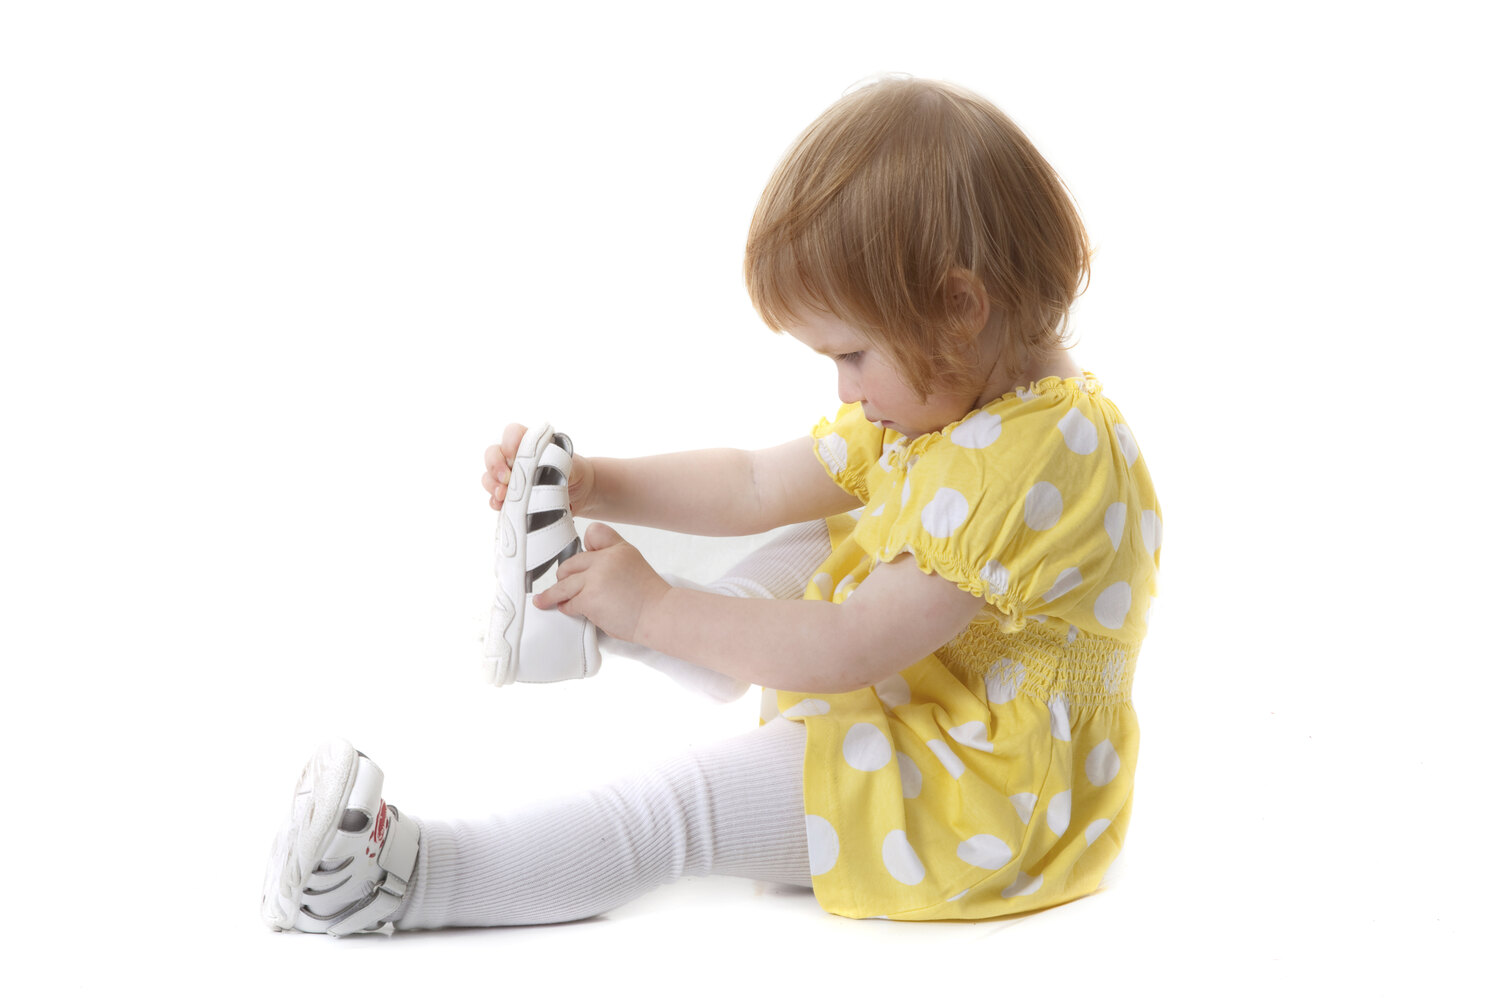 A little girl trying to put on shoes